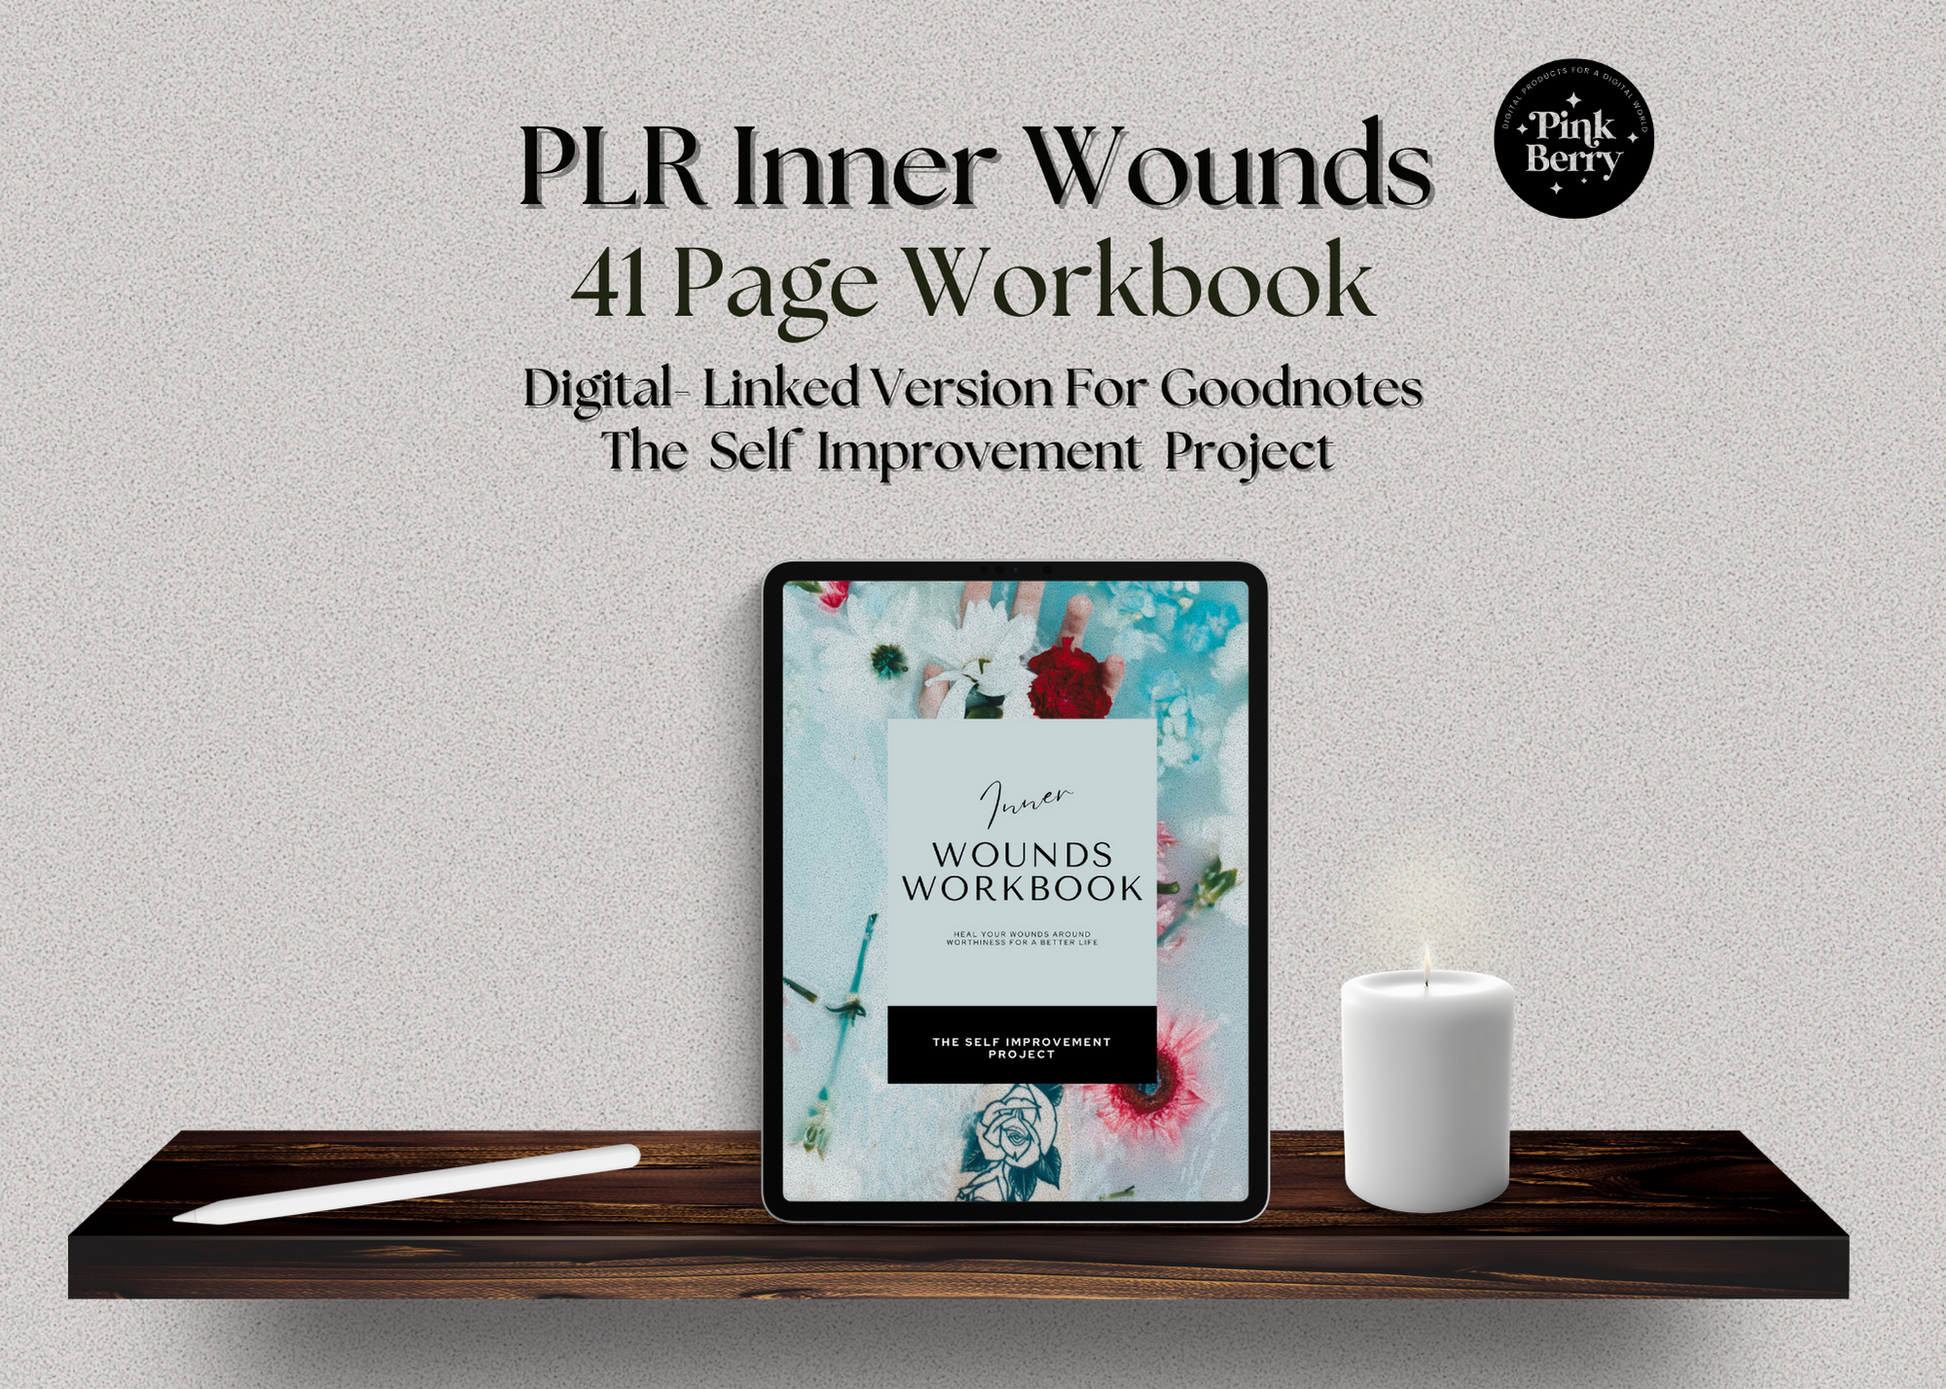 PLR Digital Workbook- Inner Wounds Workbook For Goodnotes-White Labeled Digital Product